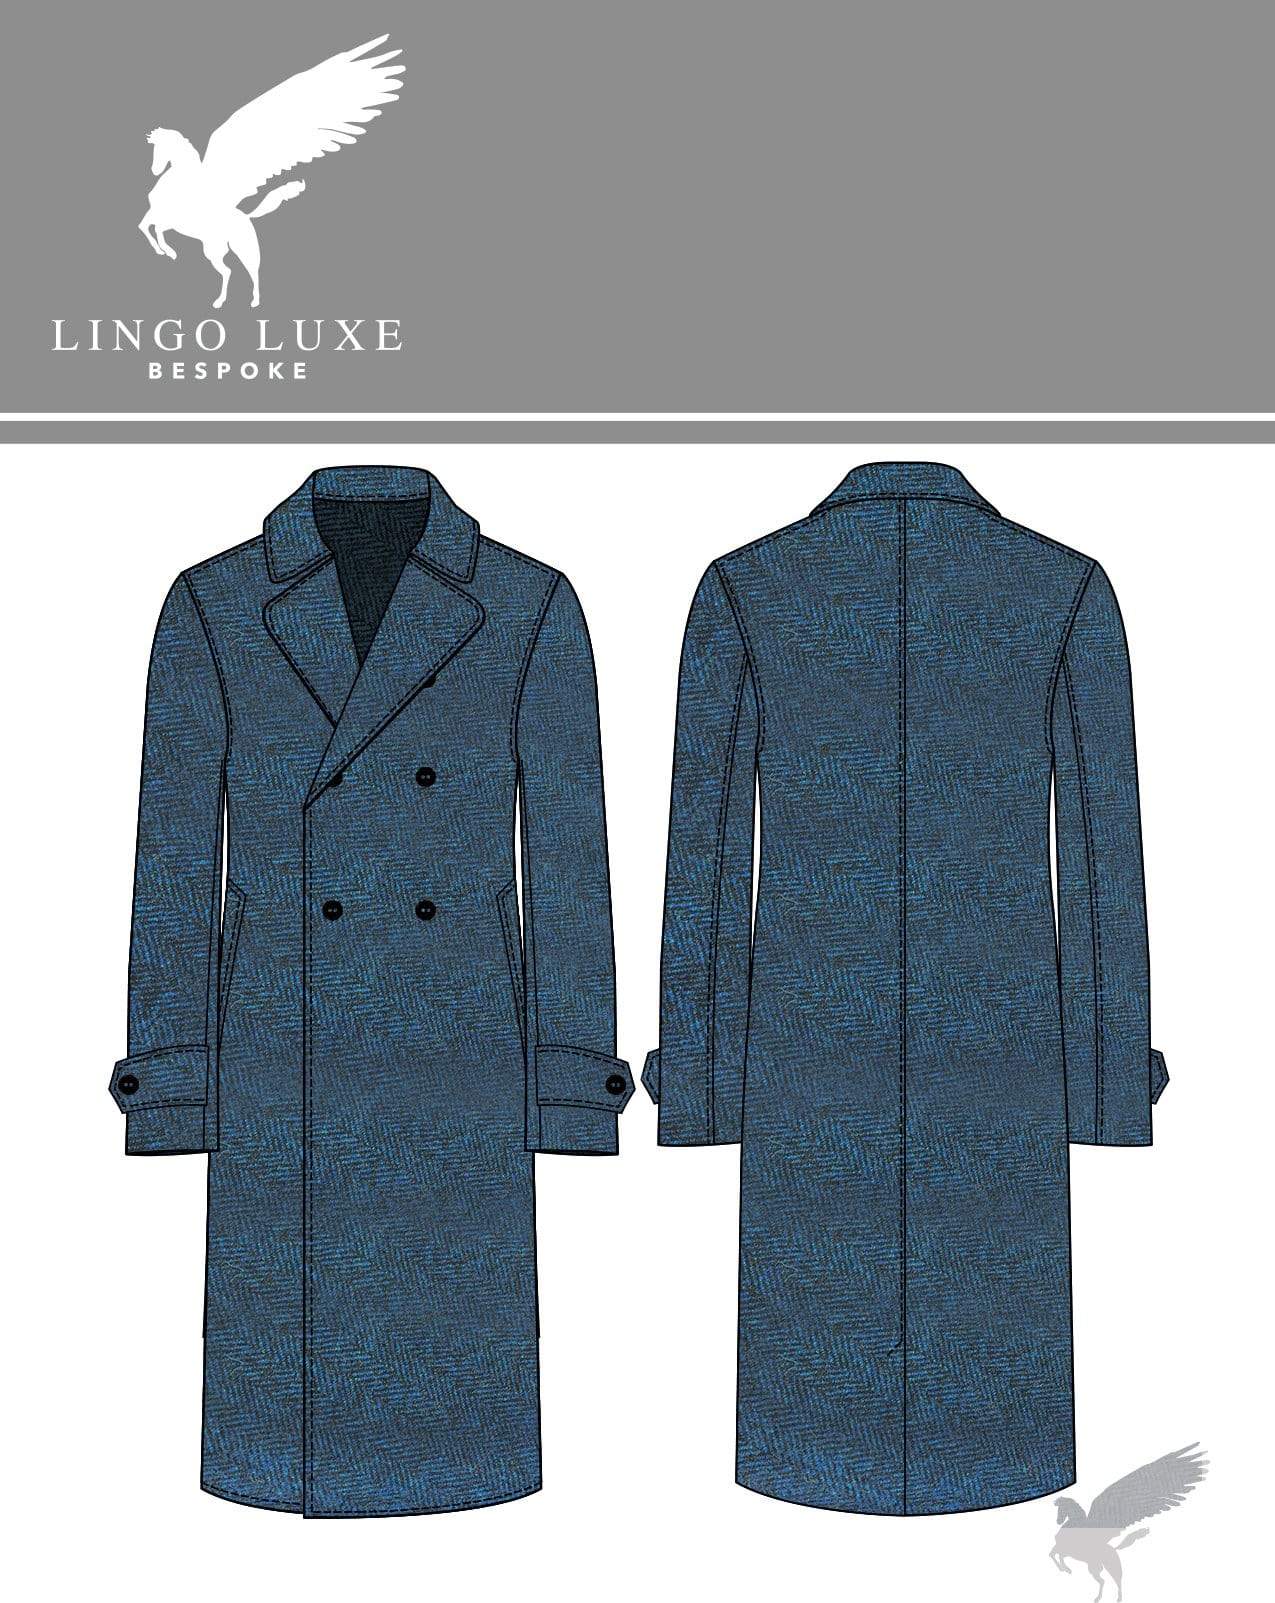 Outerwear | Lingo Luxe The Stately Overcoat | Tealy Herring-Lingo Luxe Bespoke